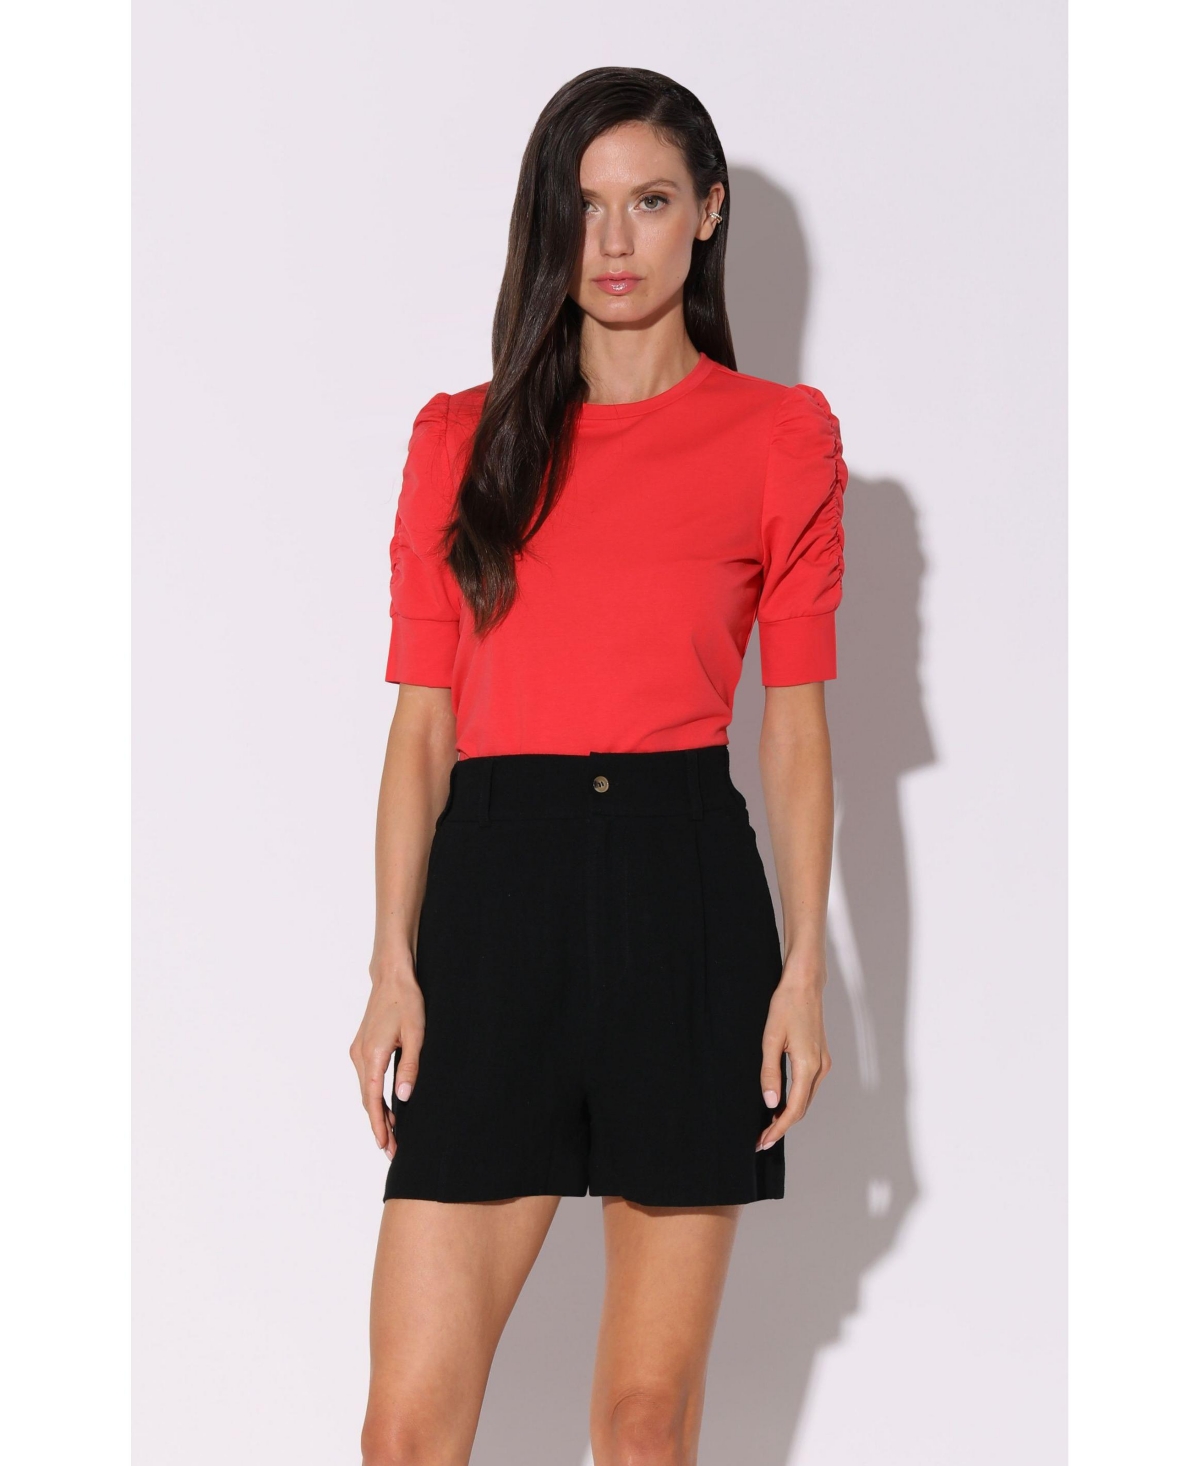 Women's Skippy Top - Red coral